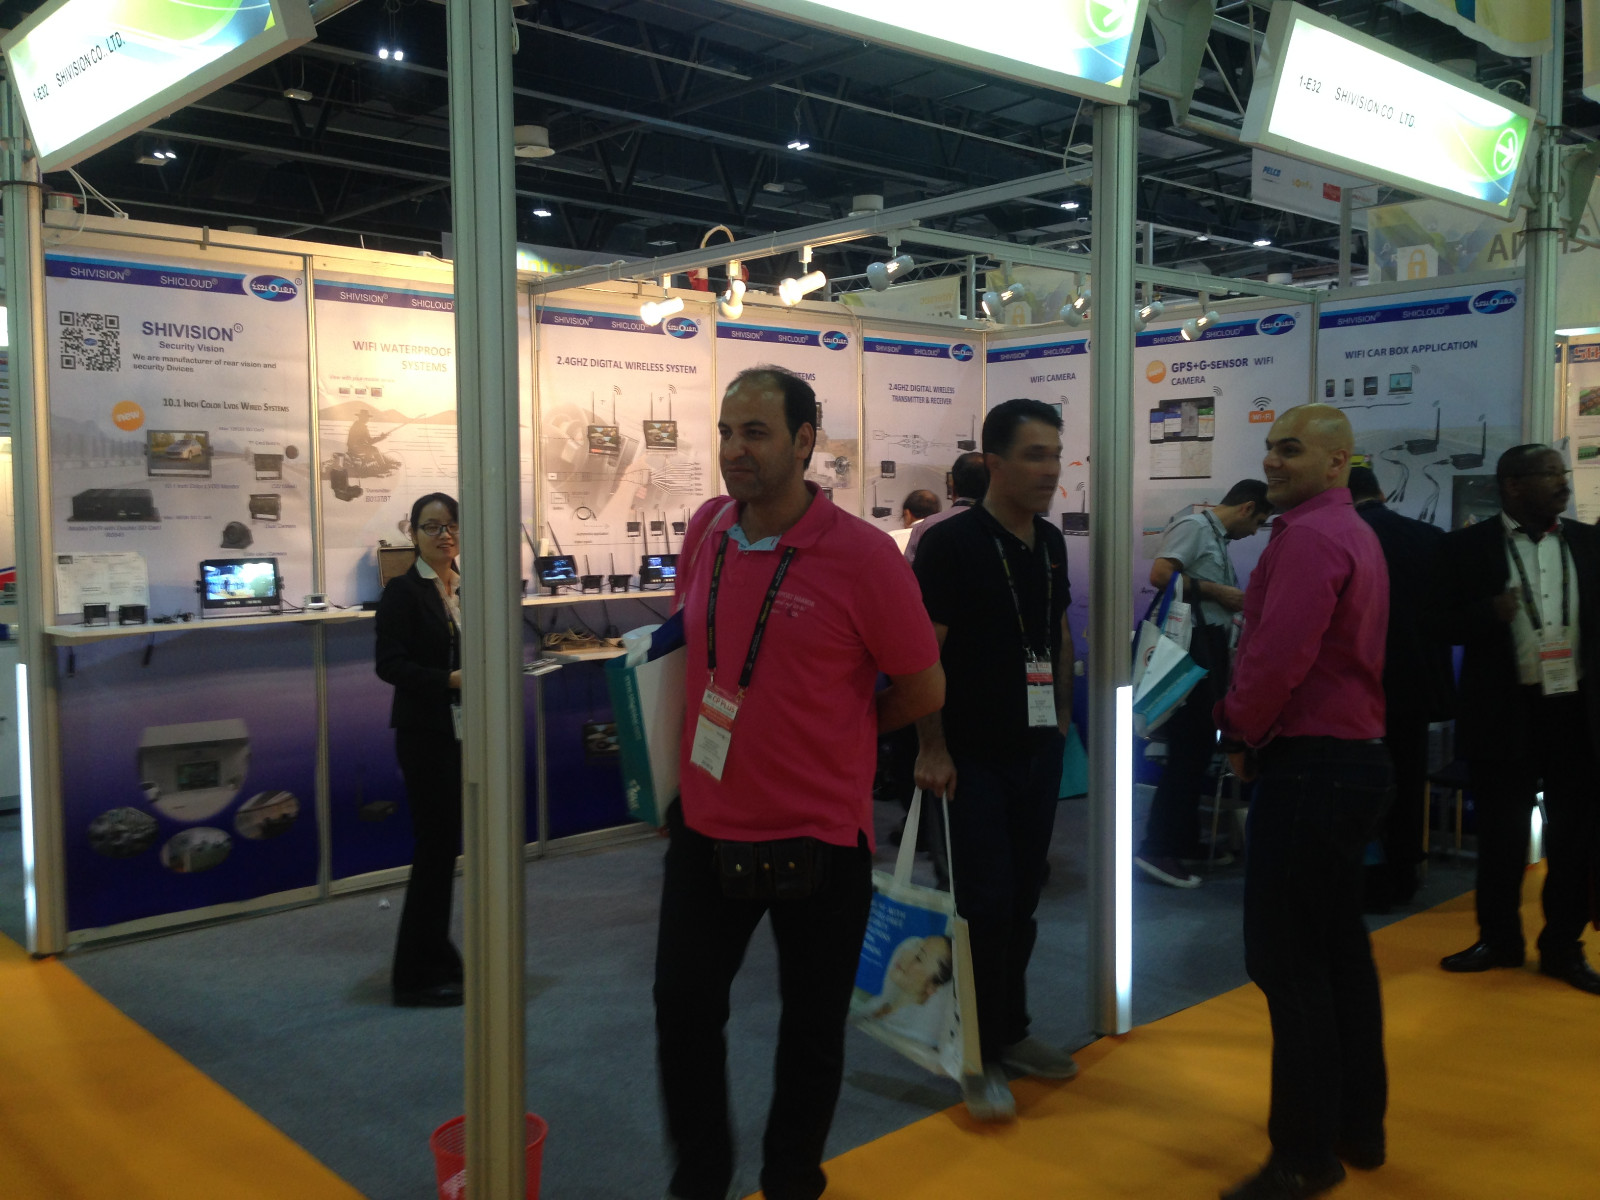 Shivision-News | 2016 The First Station, Shivision attended to Intersec 2016-2